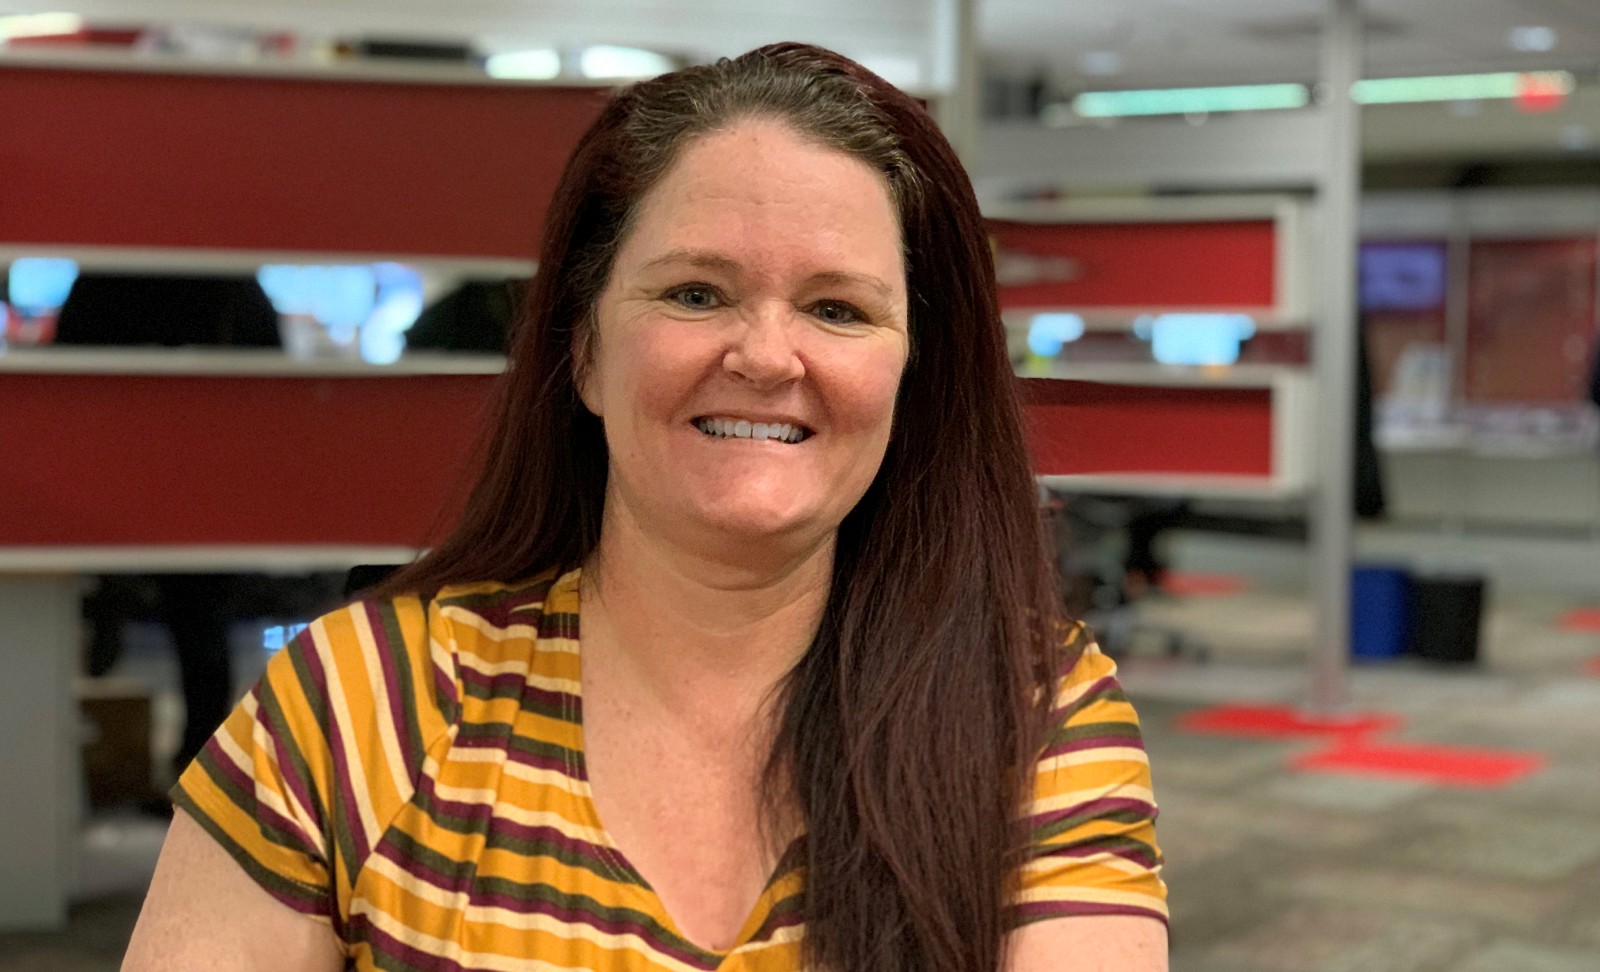 Piper Skoglund, Staff of the Month for January 2019